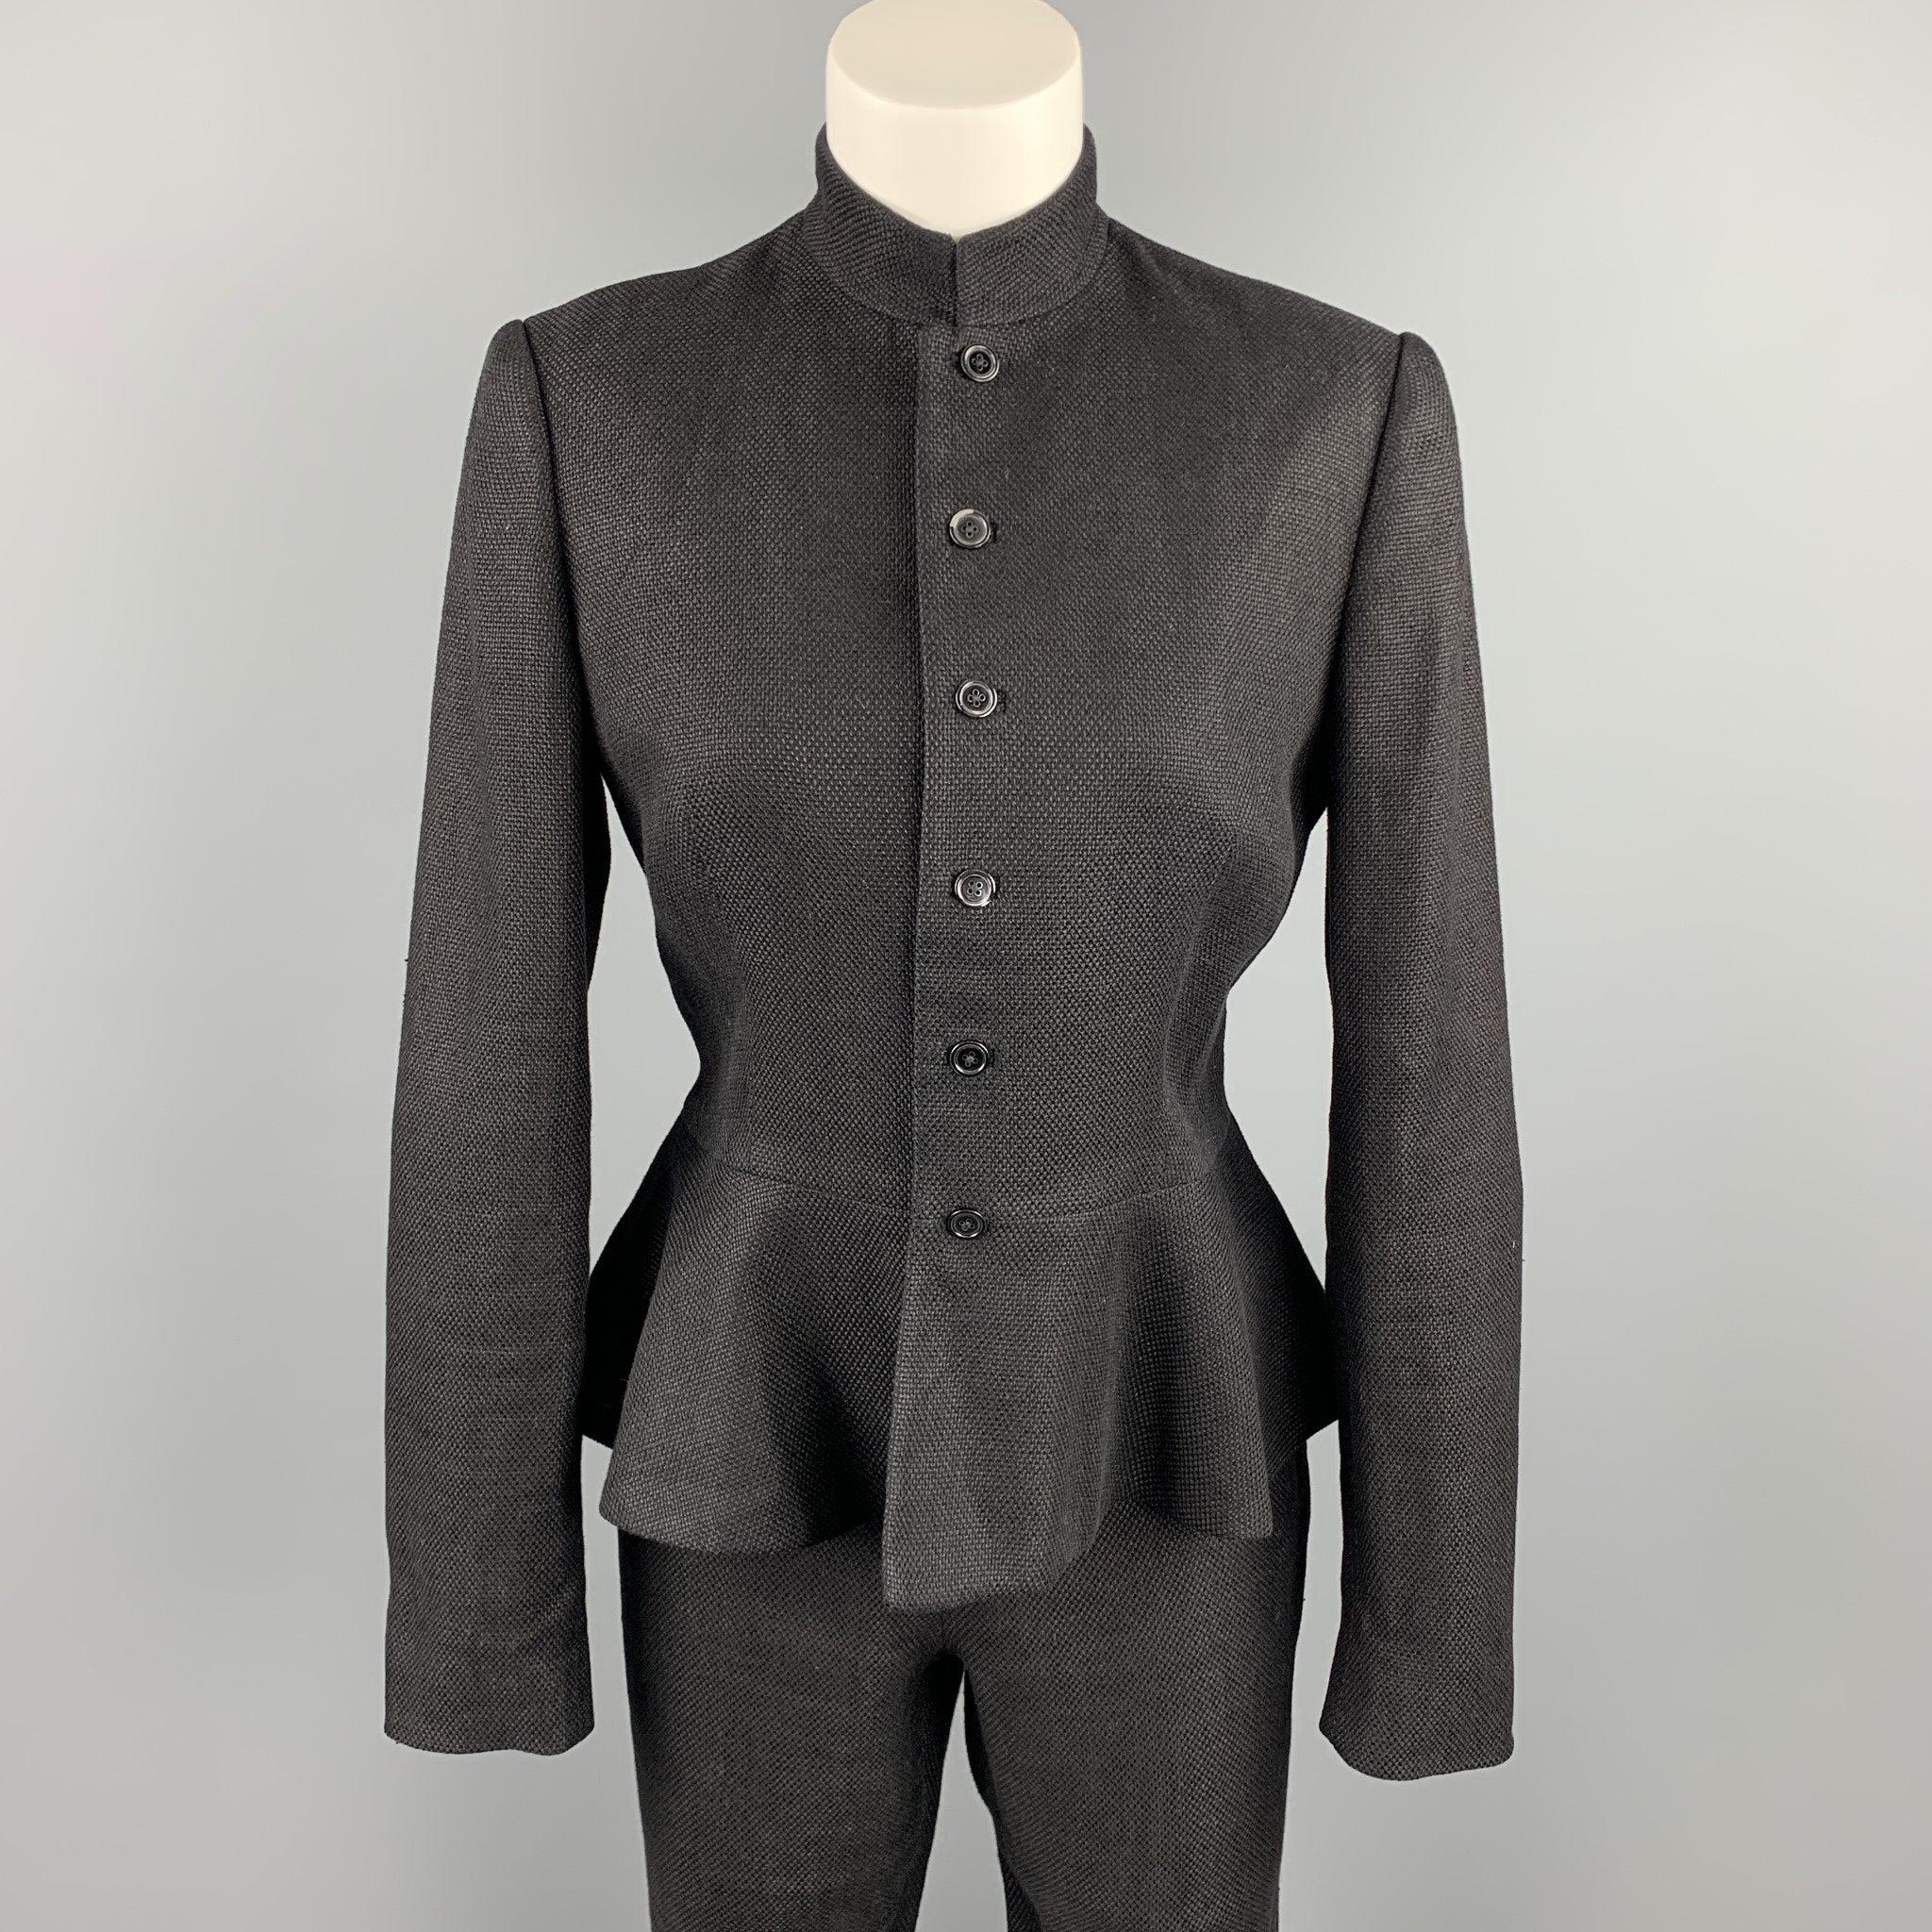 RALPH LAUREN COLLECTION pants set comes in a black woven linen / cotton and includes a peplum style, buttoned closure jacket and matching narrow leg pants.Very Good
Pre-Owned Condition. 

Marked:   8 

Measurements: 
  -JacketShoulder: 15 inches